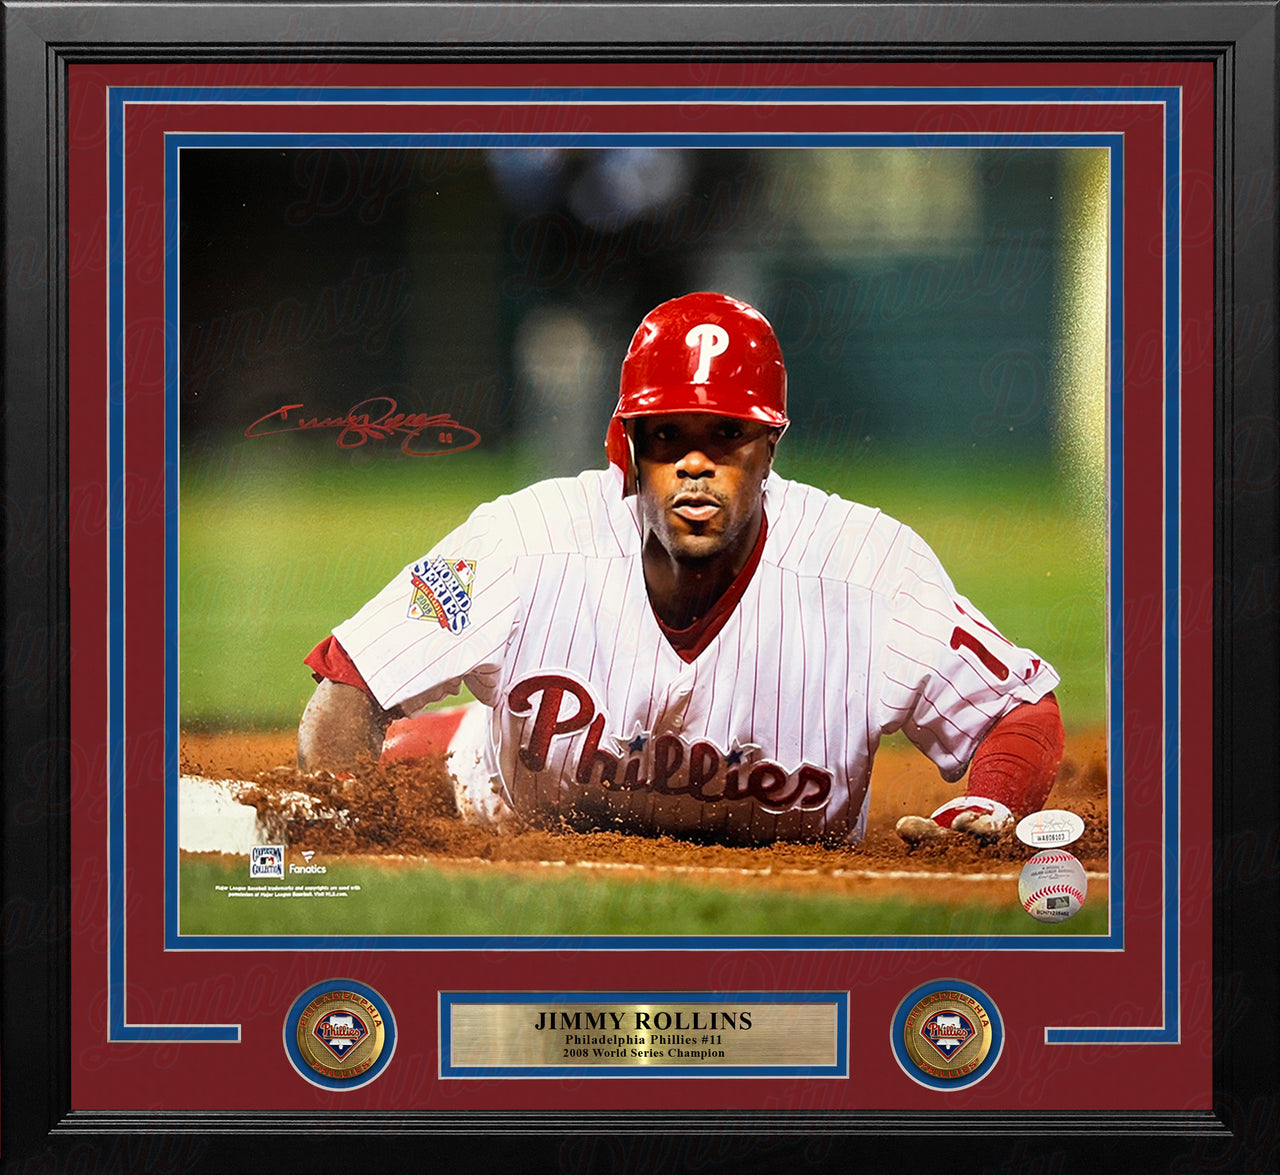 Sold at Auction: 2004 Jimmy Rollins autographed Philadelphia